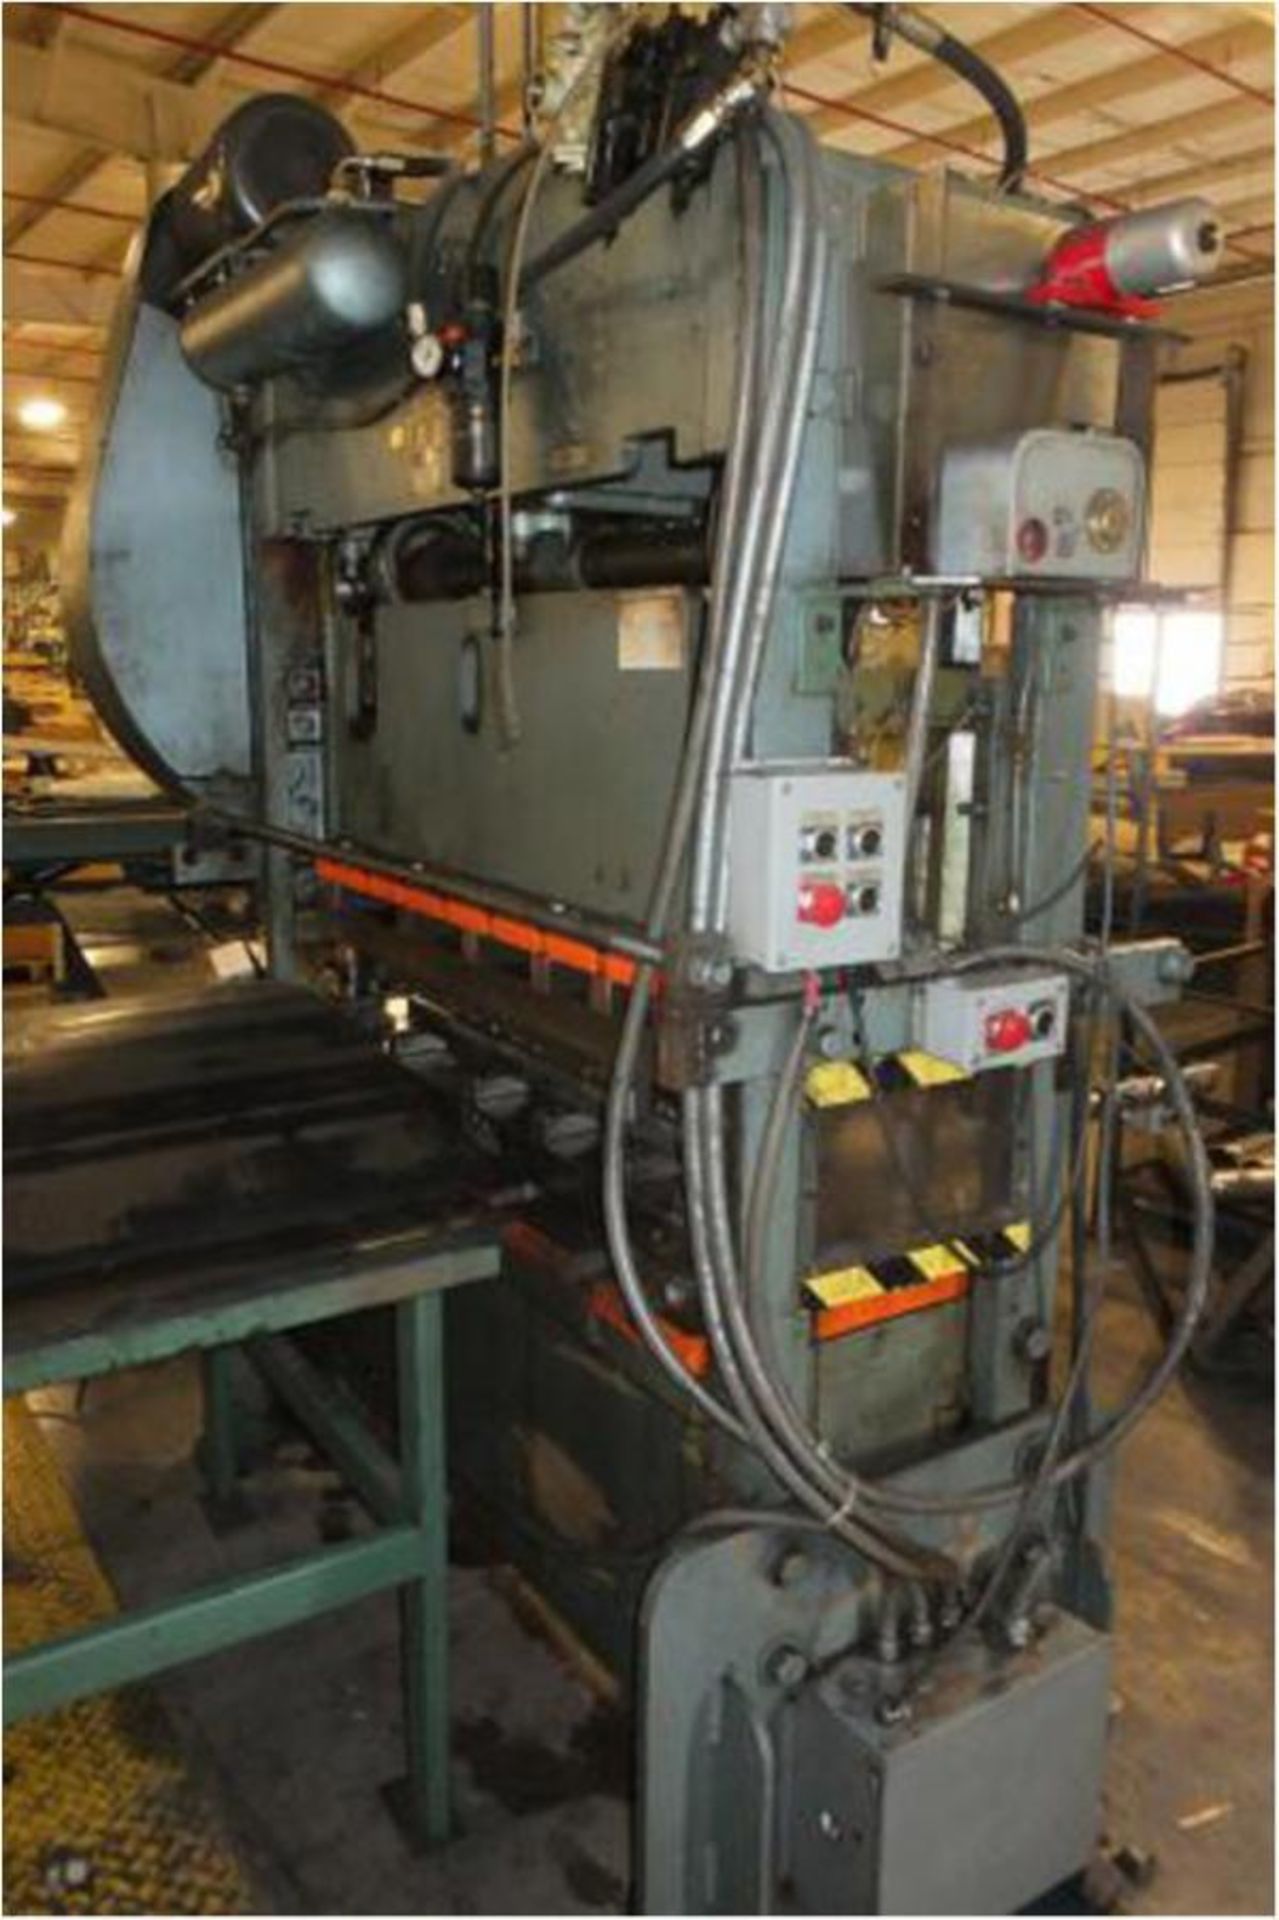 Heim Straight Side Double Crank Press, 40 Ton x 56" x 22", Mdl: S2-40, S/N: H-3668 (6932P) ( - Image 3 of 4